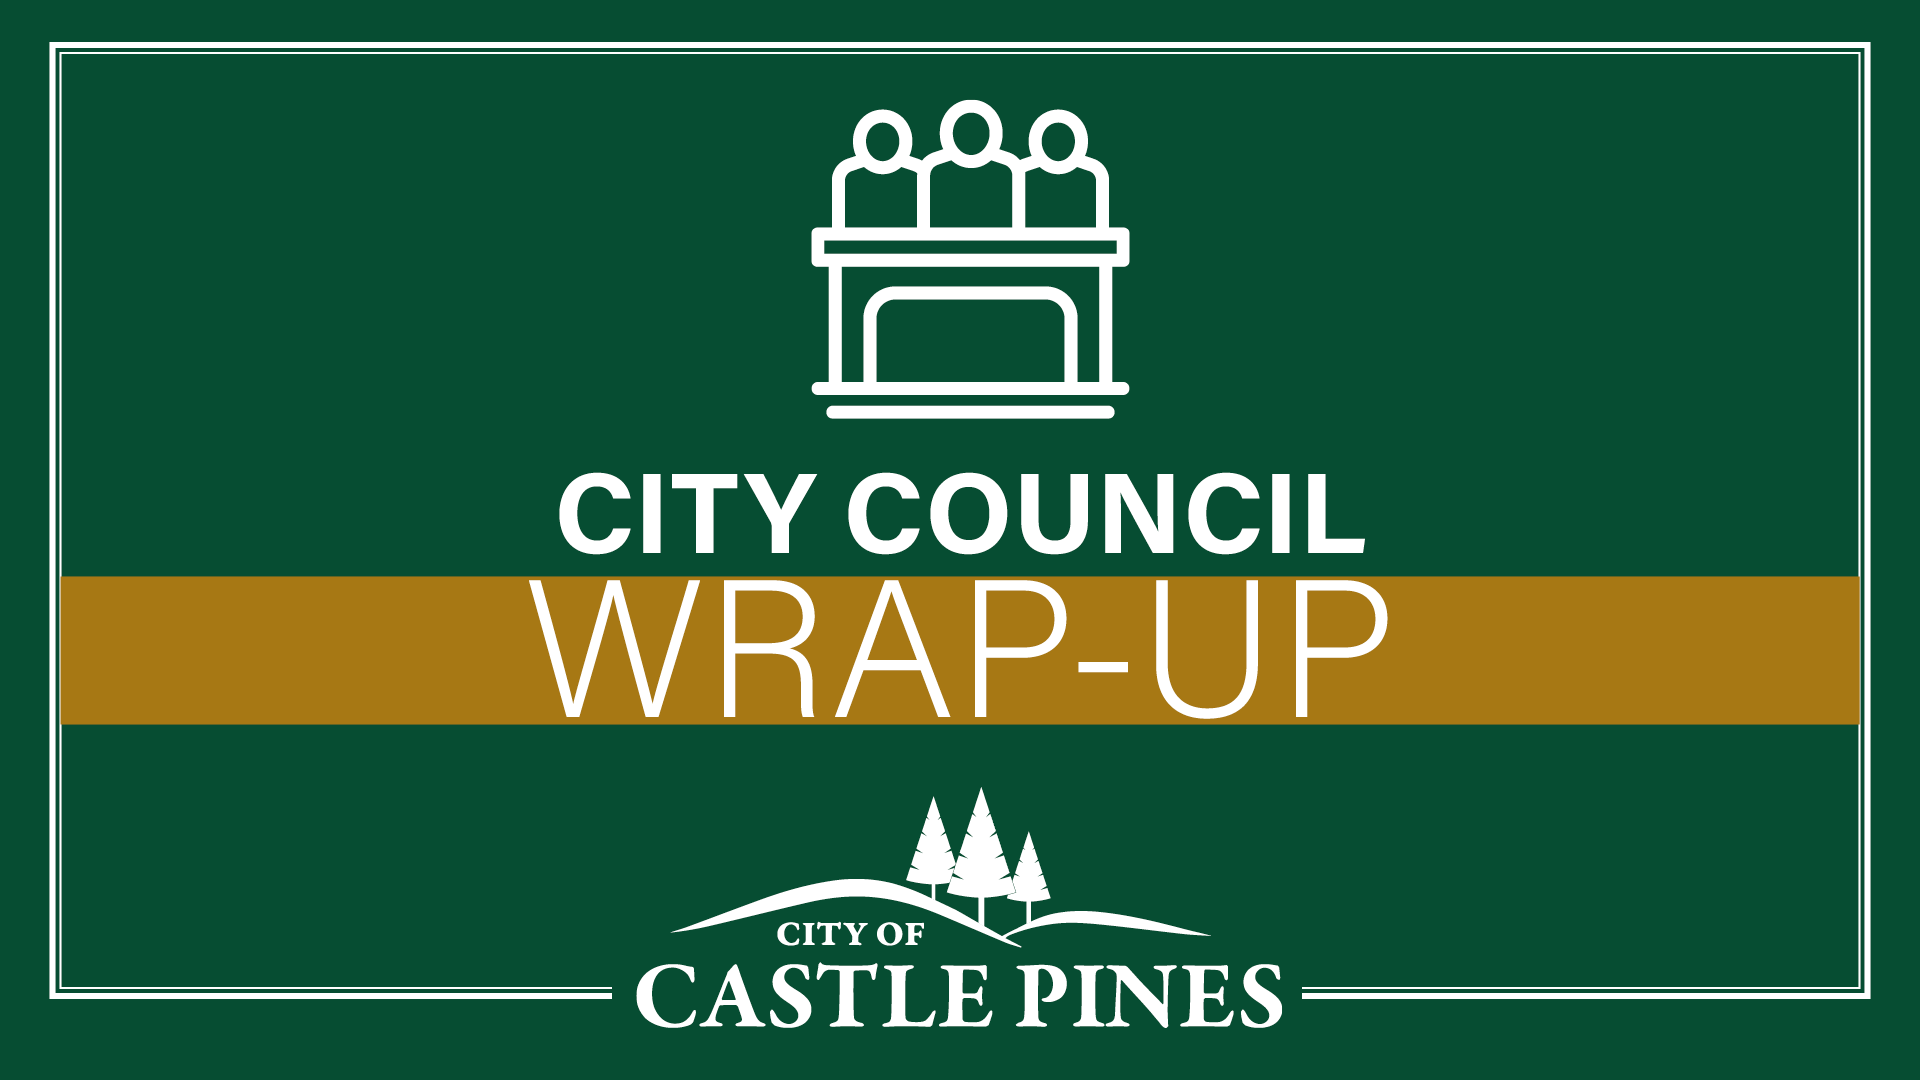 Decorative image with City of Castle Pines logo and text that reads City Council Wrap-Up.